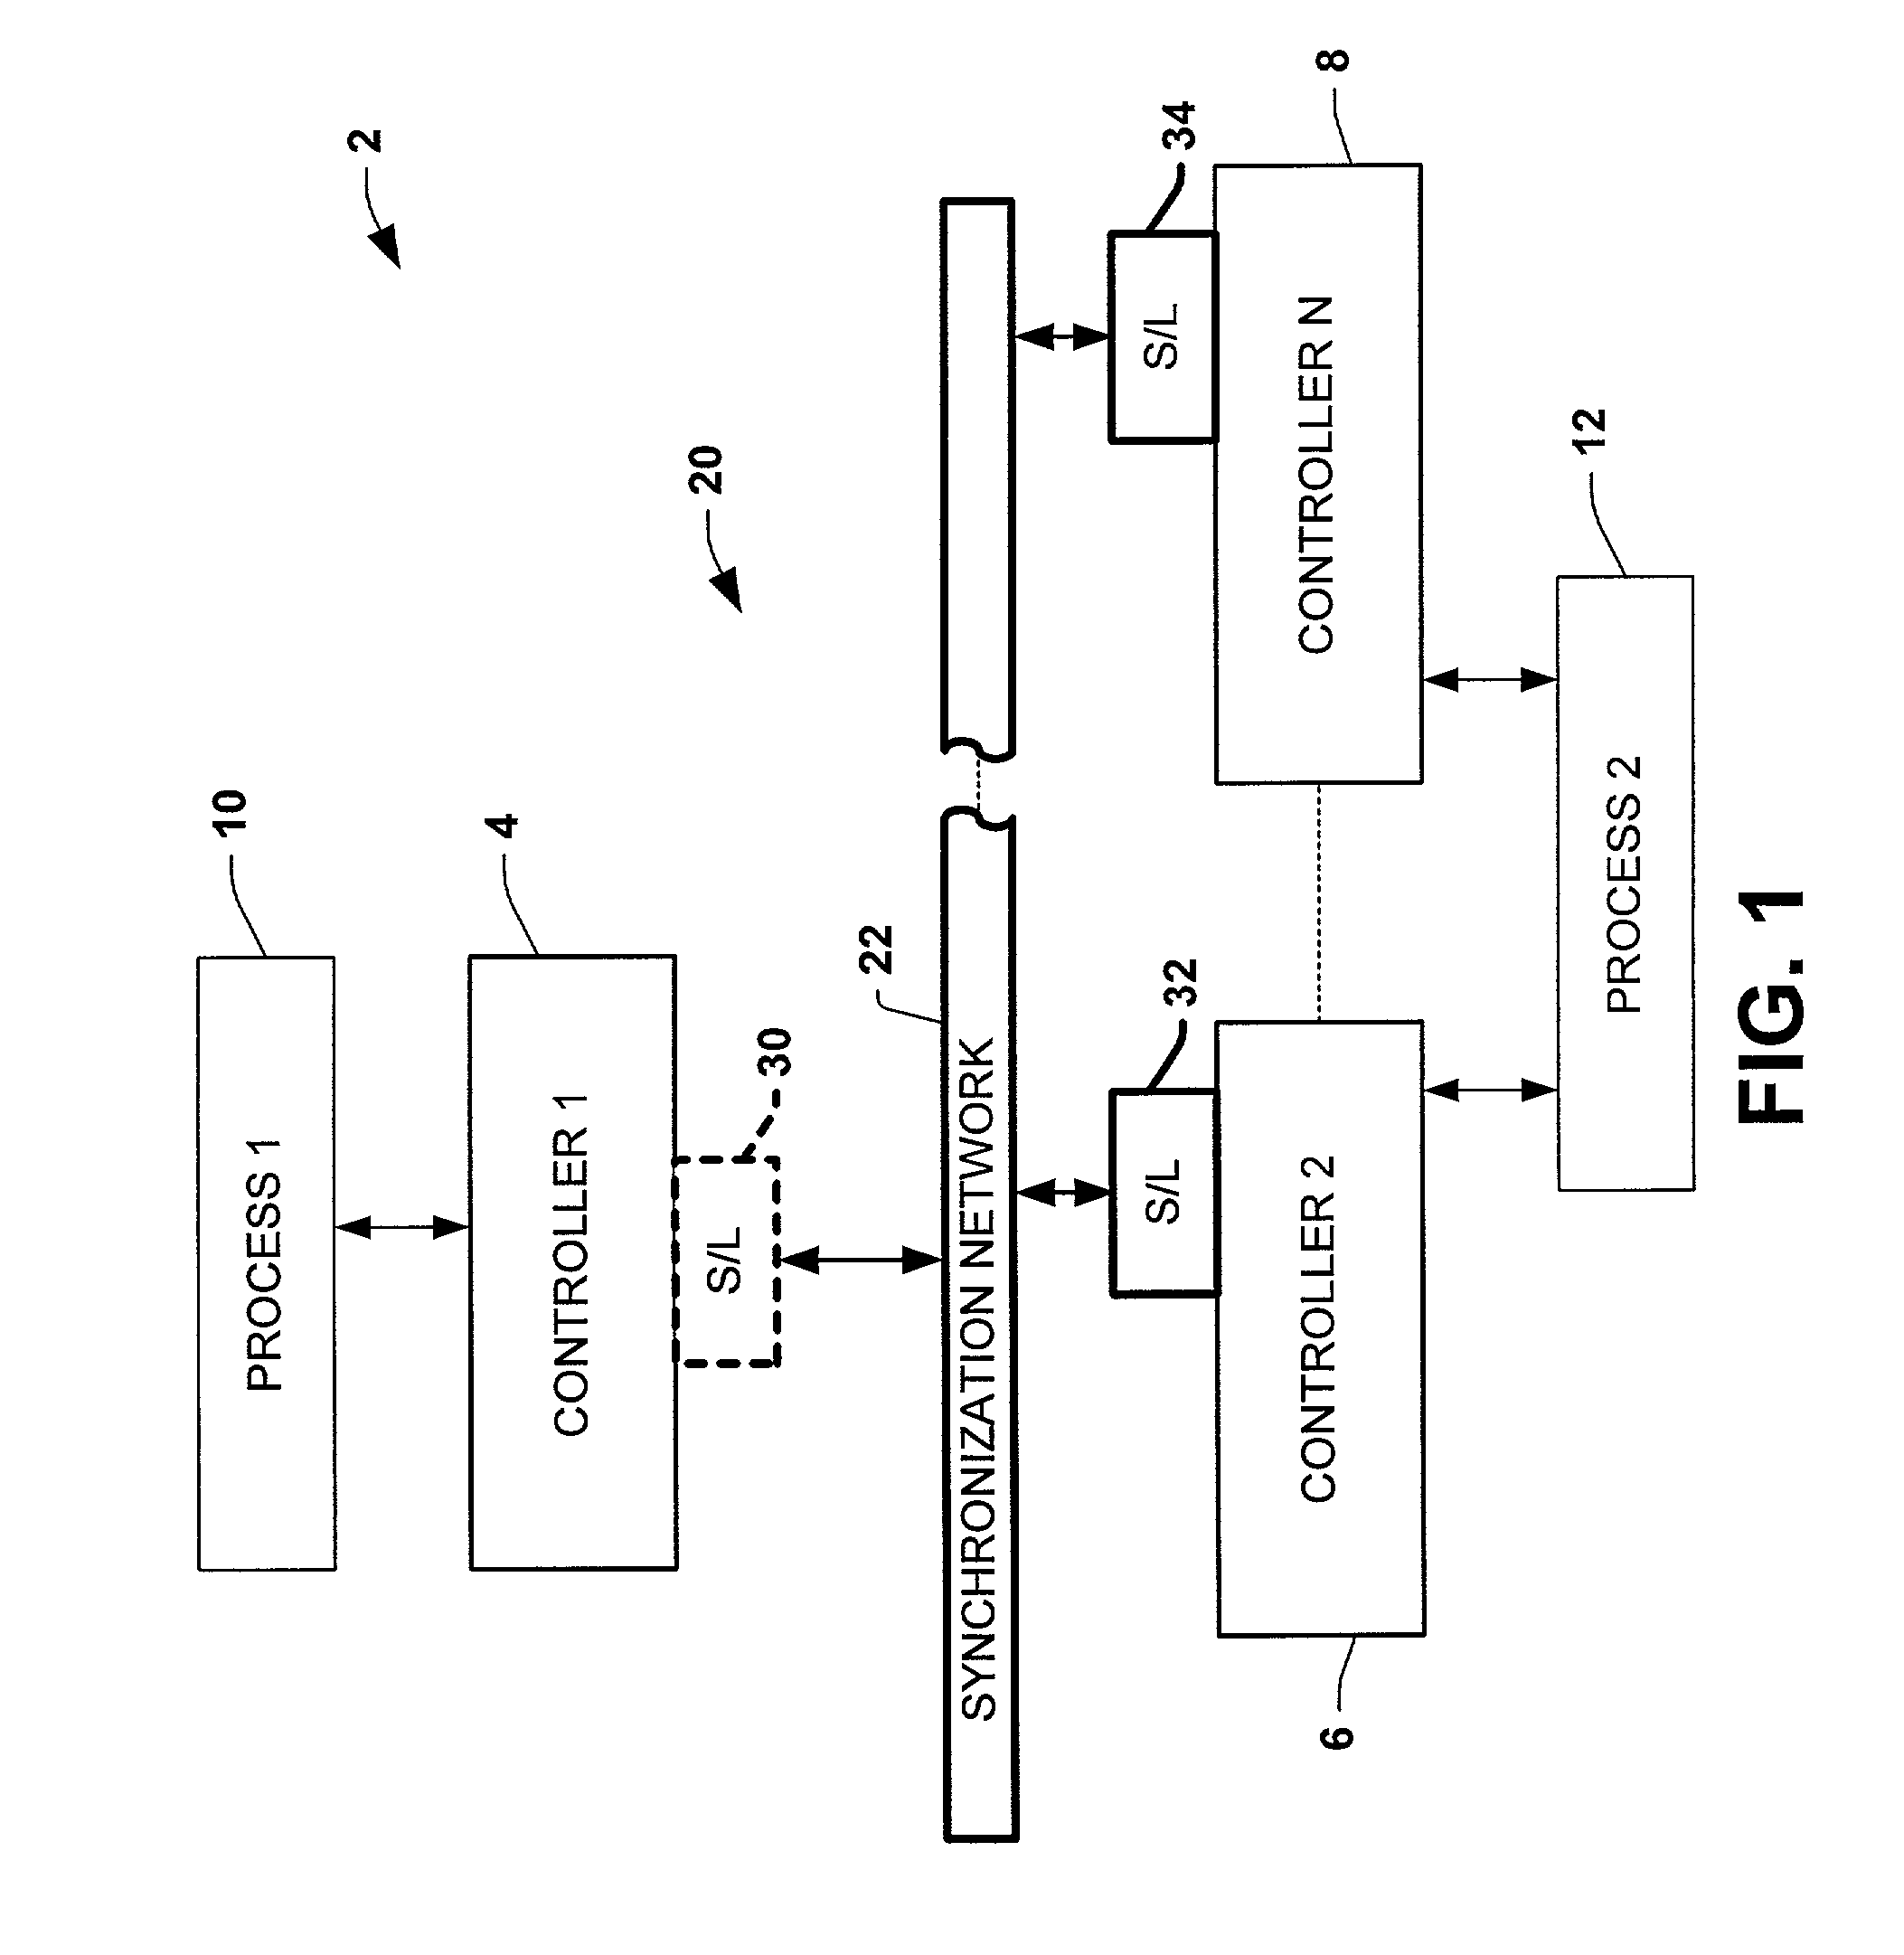 Apparatus for multi-chassis configurable time synchronization